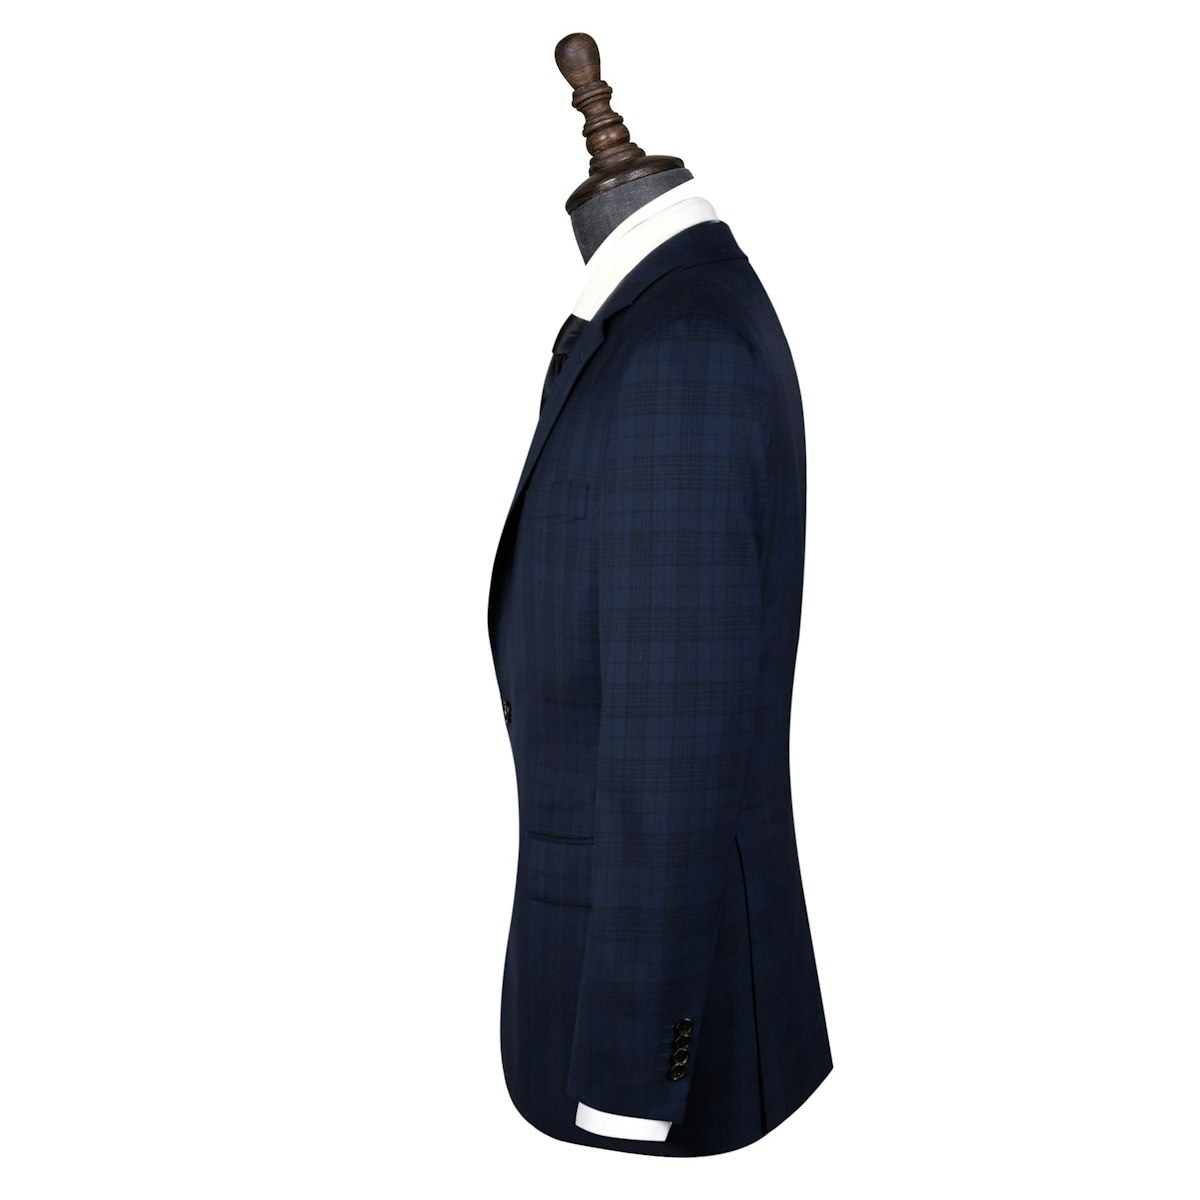 InStitchu Collection The Londonderry mens suit